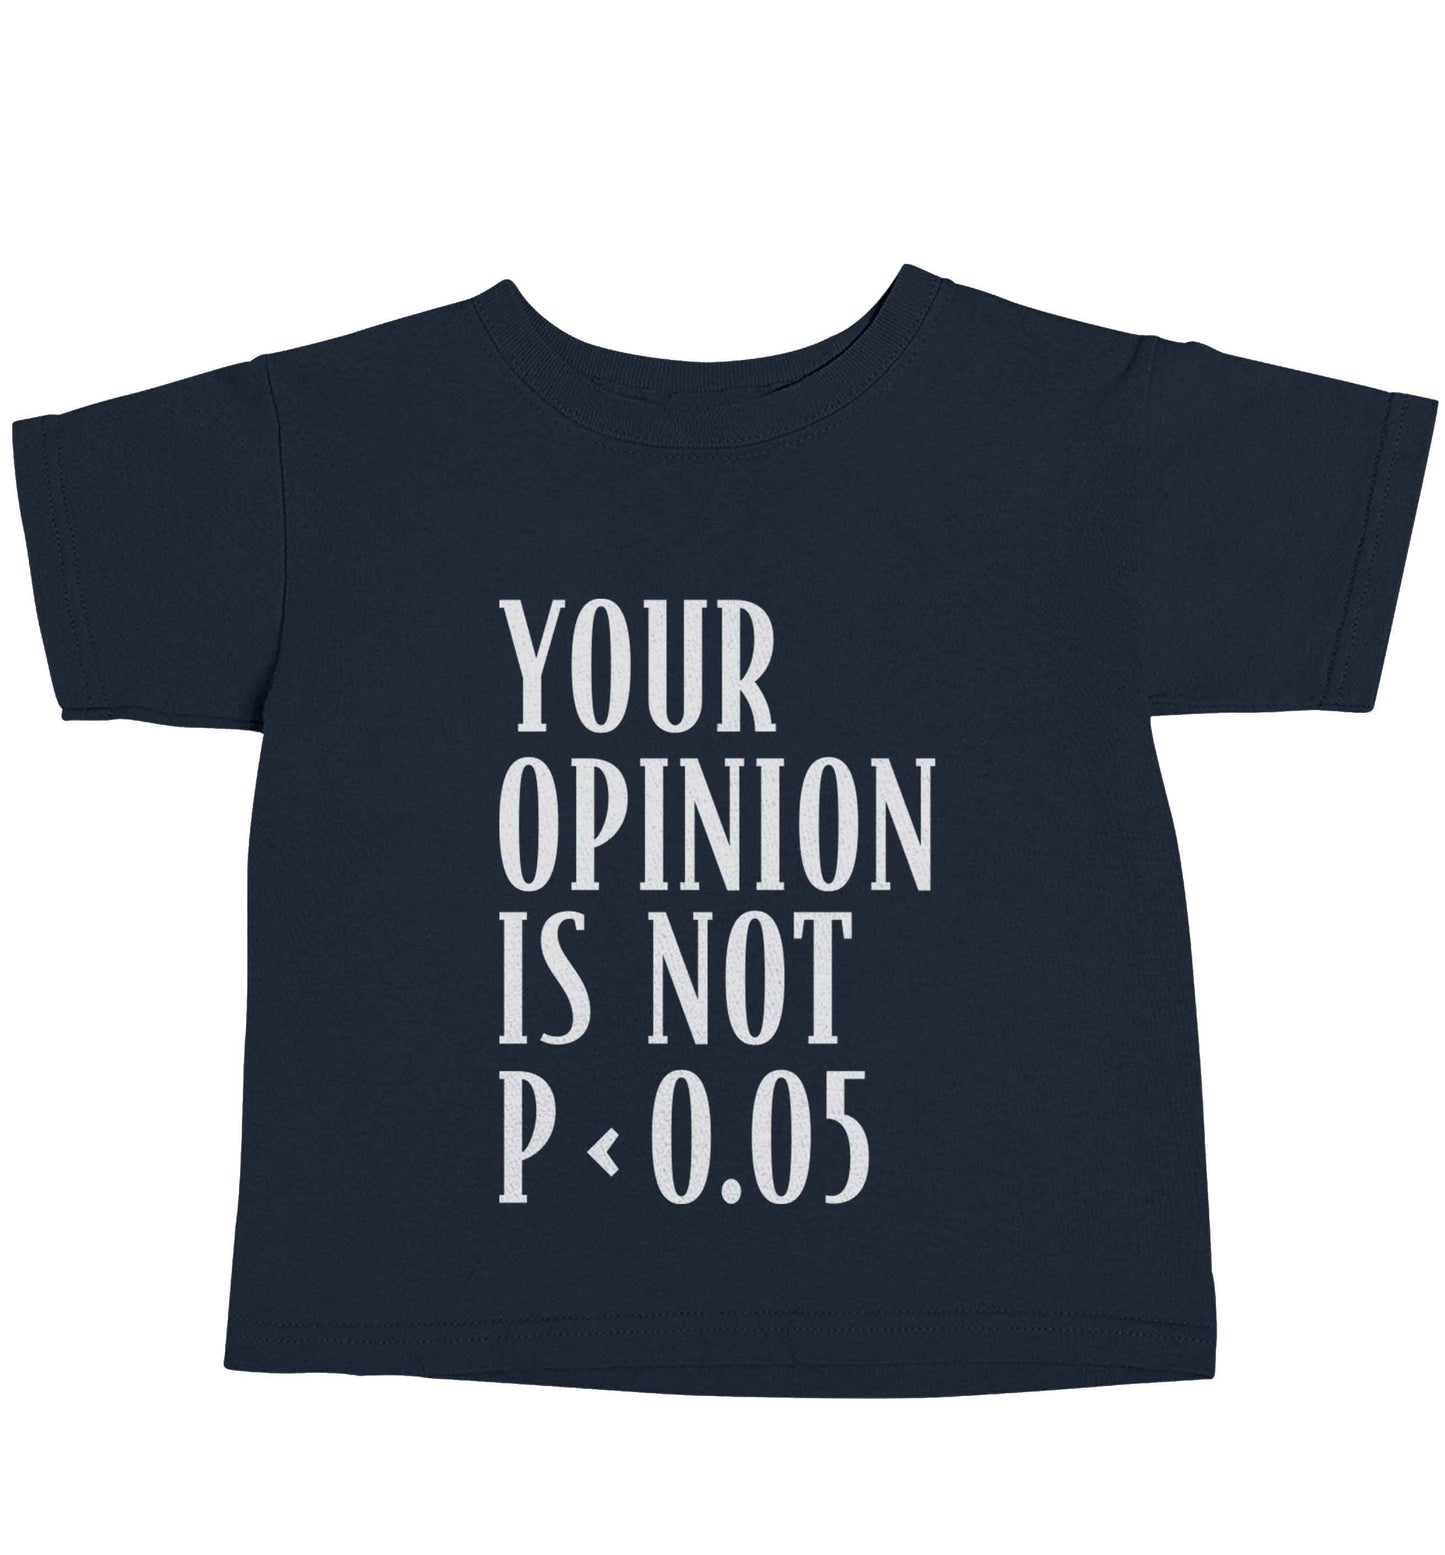 Your opinion is not P < 0.05navy baby toddler Tshirt 2 Years